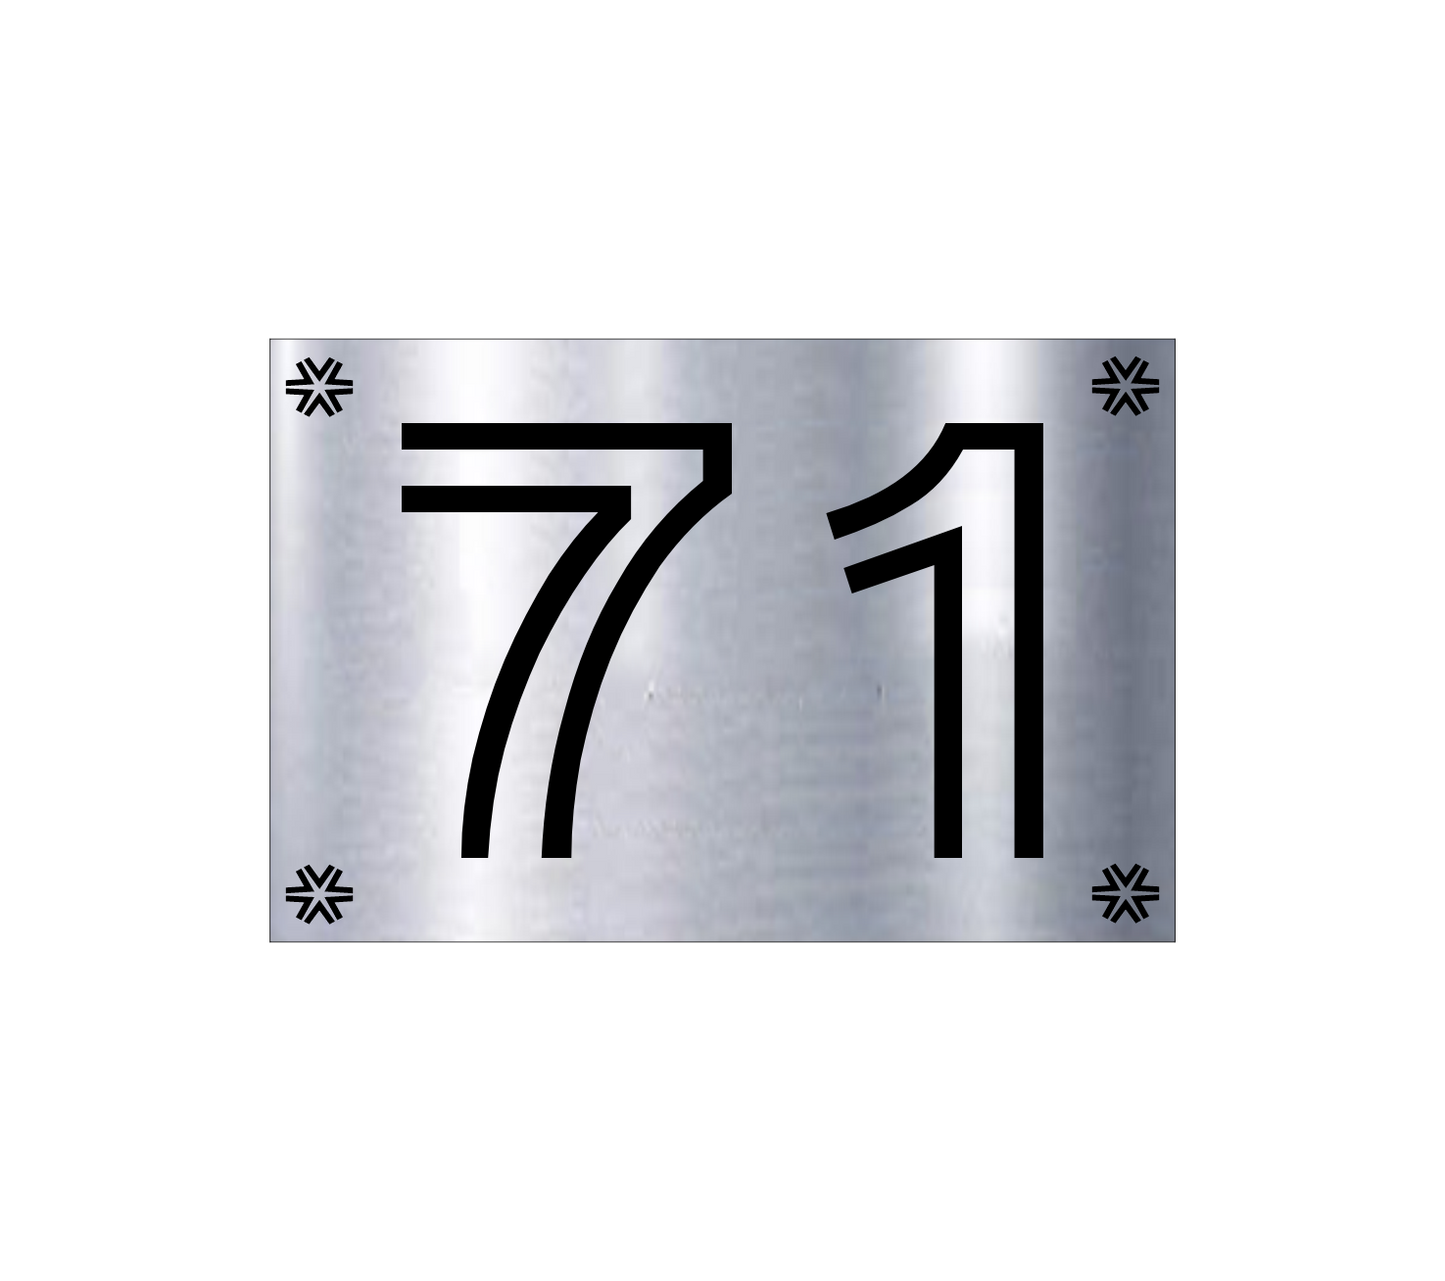 Street Sign, House Number MANHATTAN 11 colors 